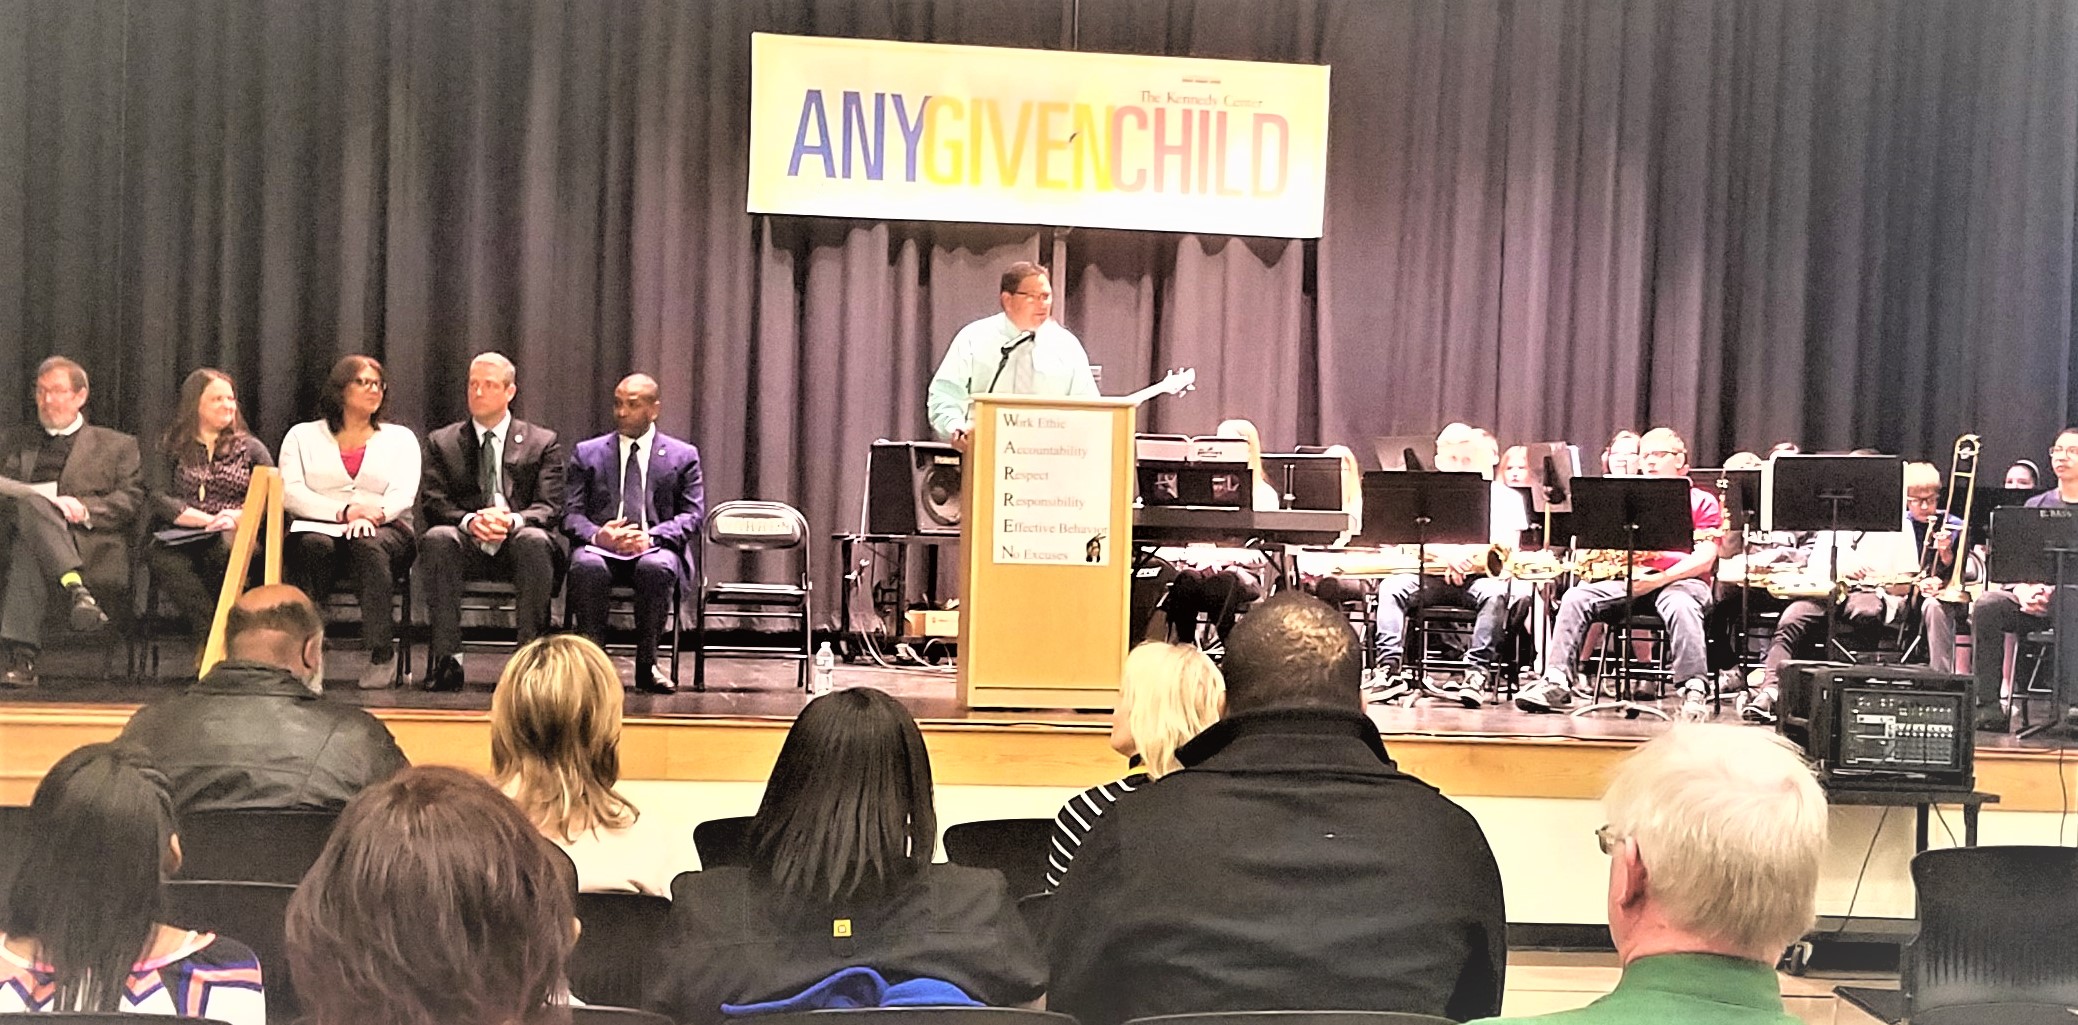 Superintendent Steve Chiaro, at podium, discusses the Any Given Child initiative in Warren City Schools during an April 10 press conference at the Lincoln PK-8 School.